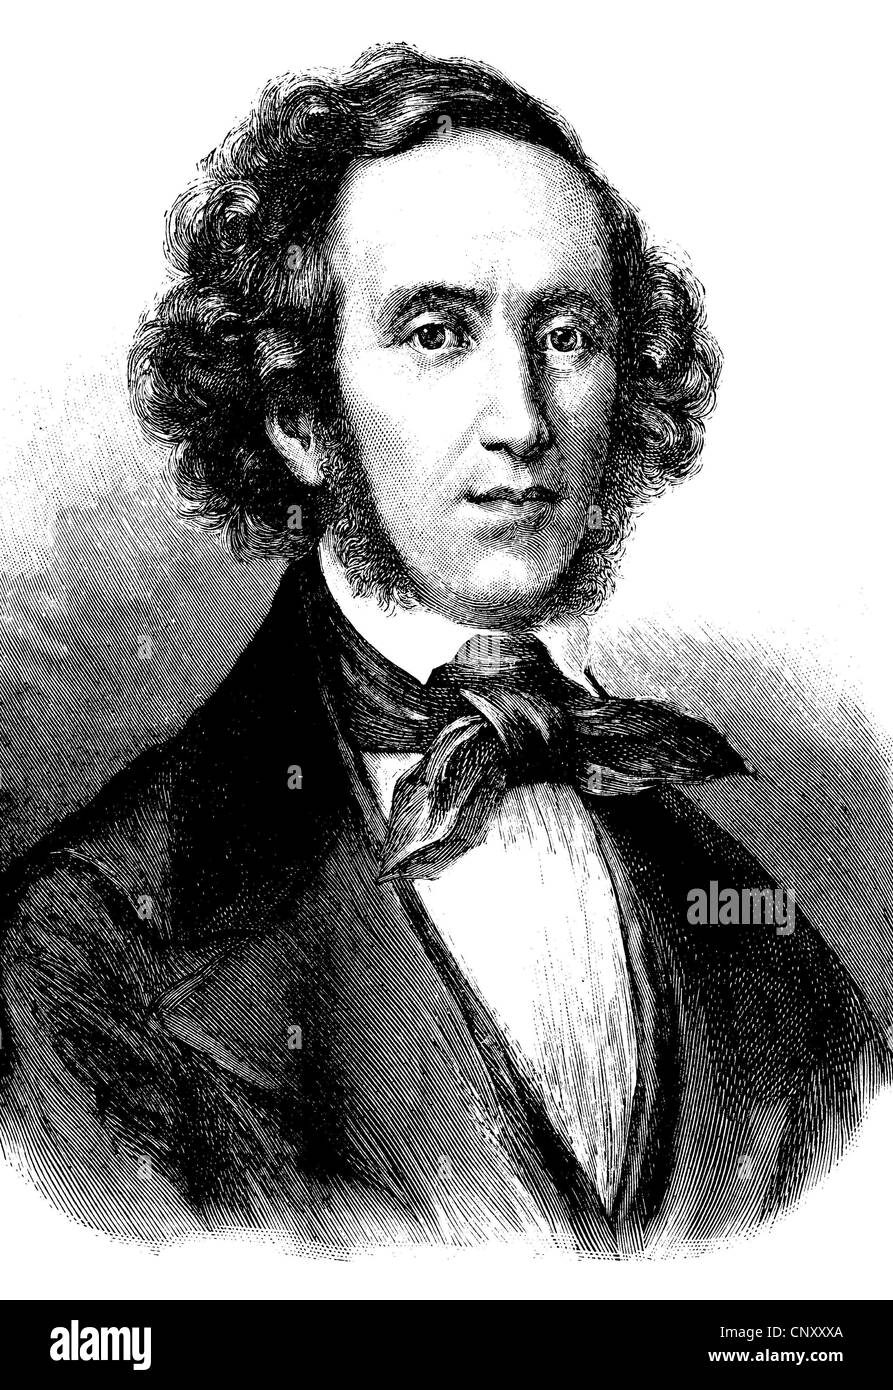 Jakob Ludwig Felix Mendelssohn Bartholdy, 1809 - 1847, a German composer, pianist and organist, he is considered one of the grea Stock Photo